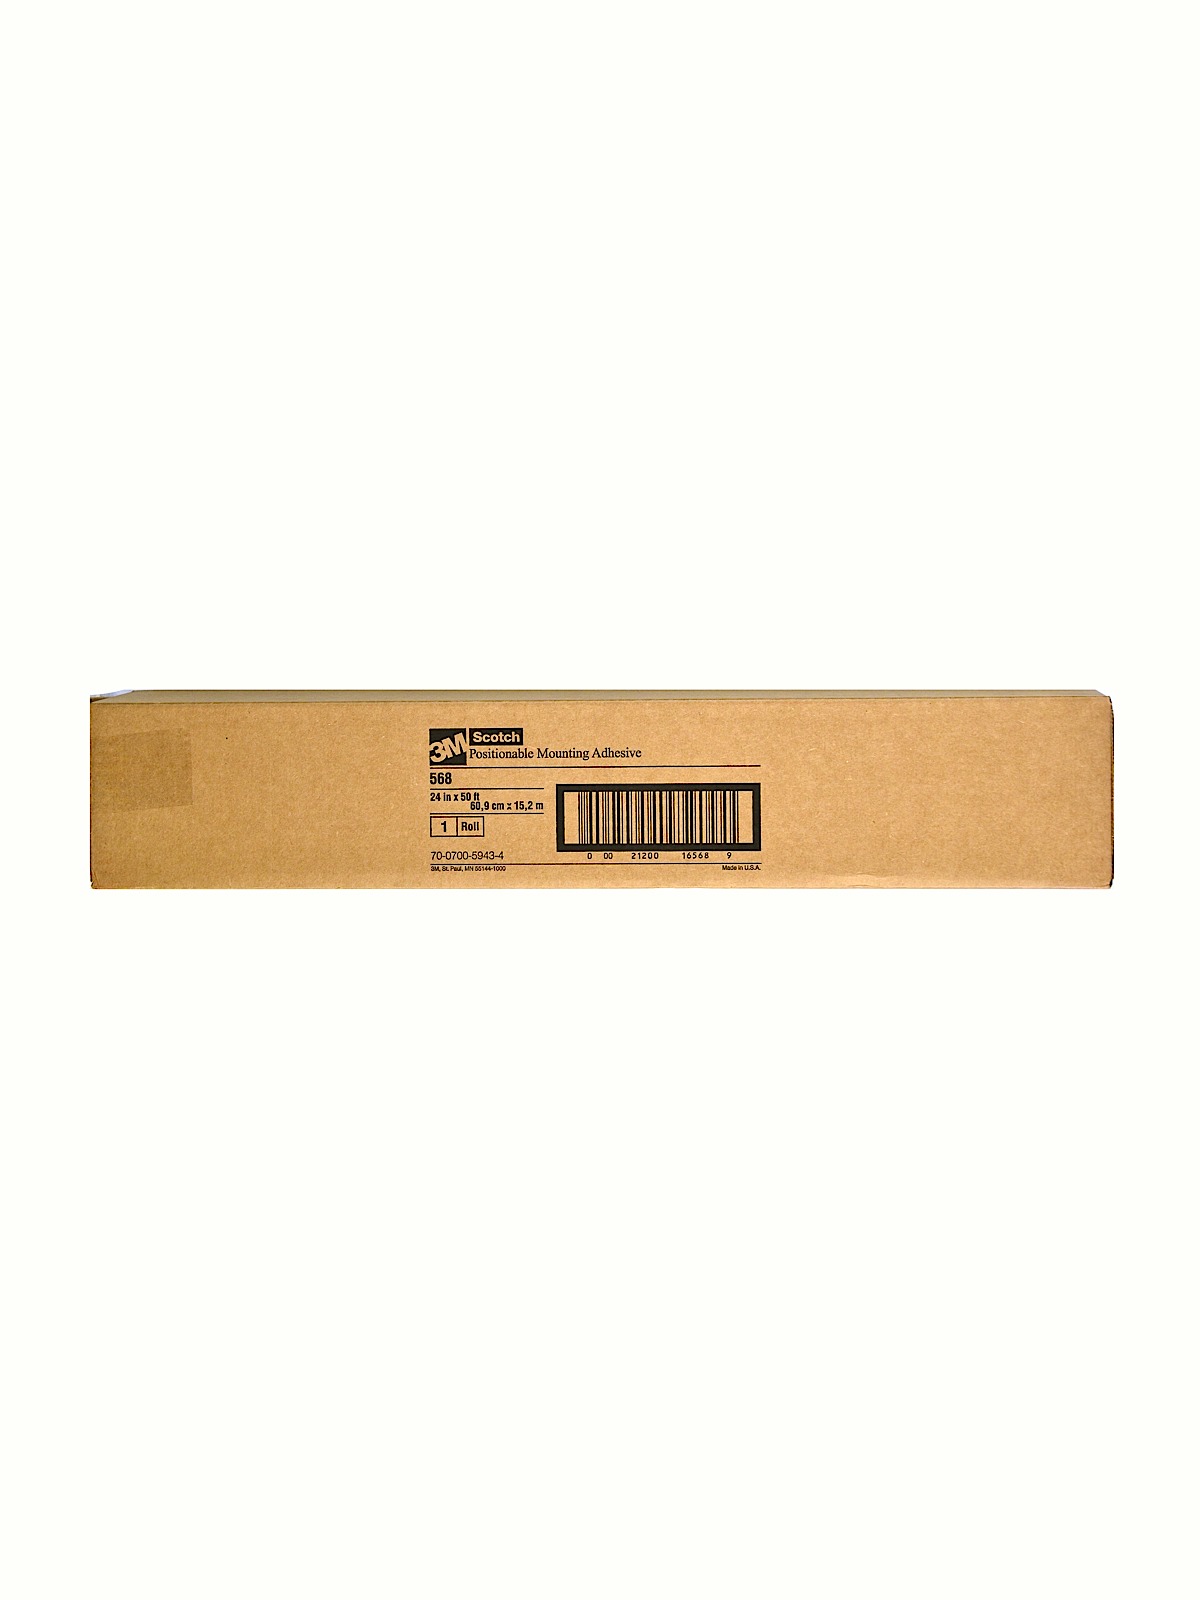 Positionable Mounting Adhesive 568 24 in. x 50 ft. 568